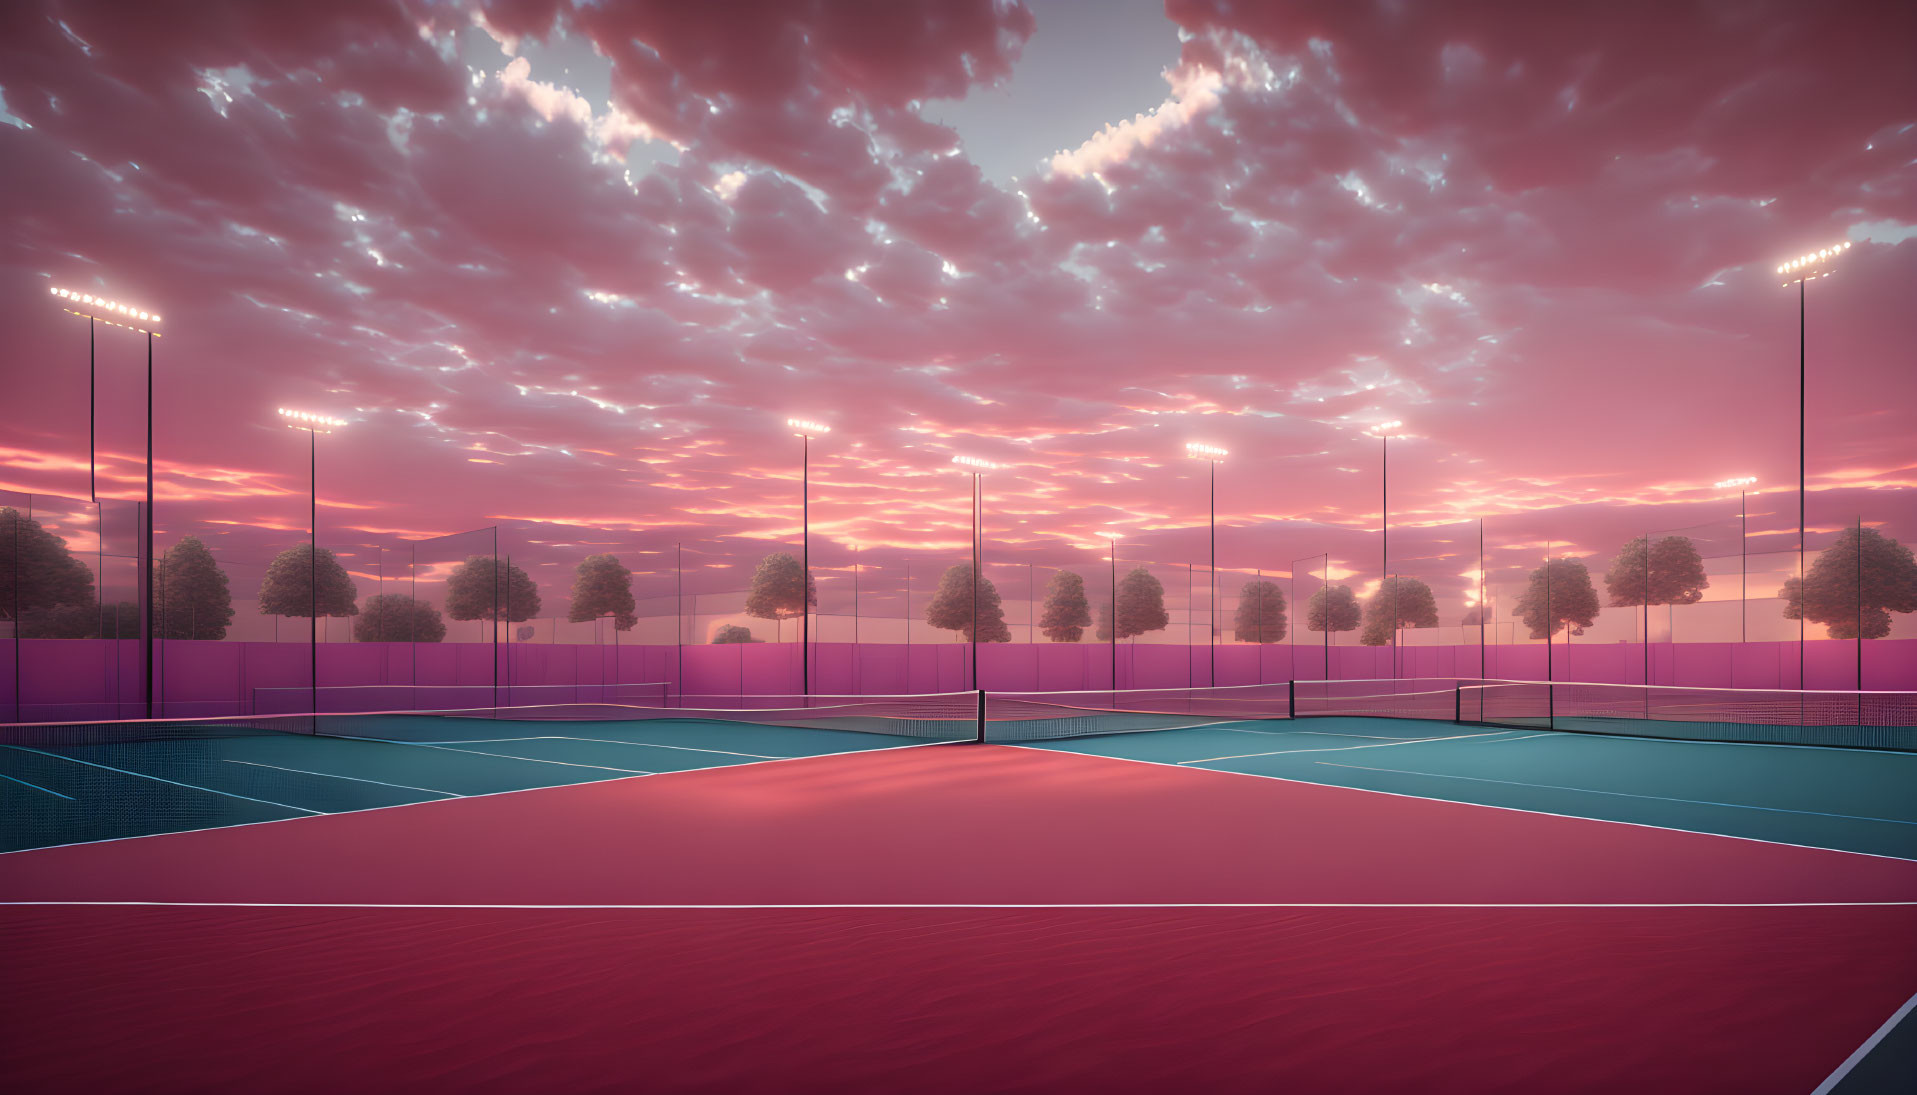 Deserted tennis courts at sunset with blue and pink hues